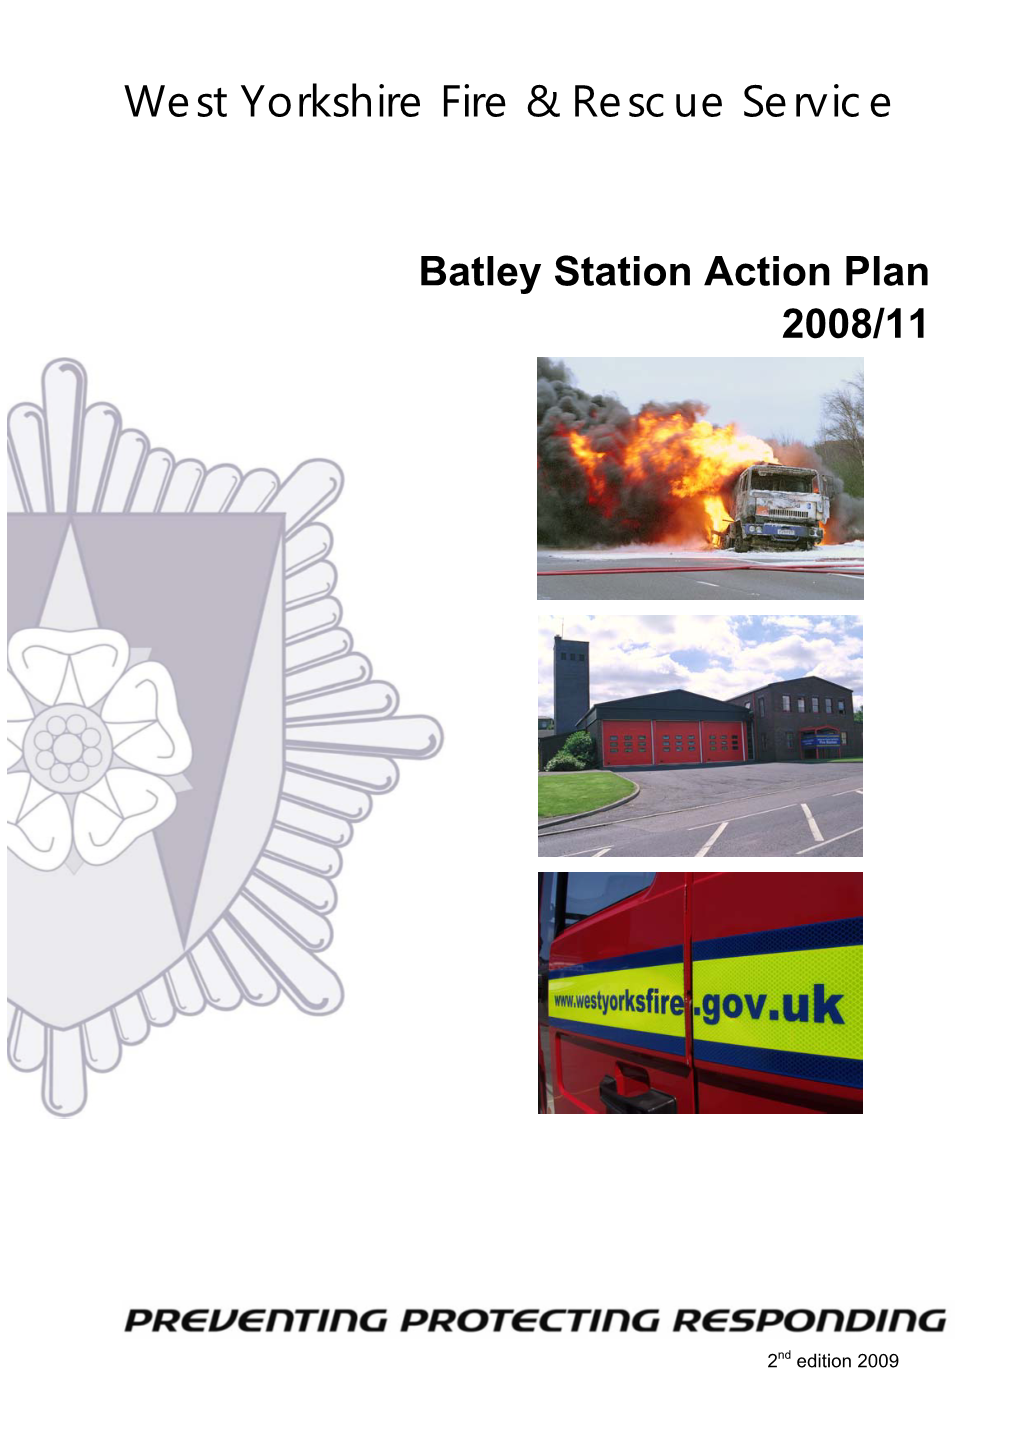 Batley Fire Station Action Plan 2008/11